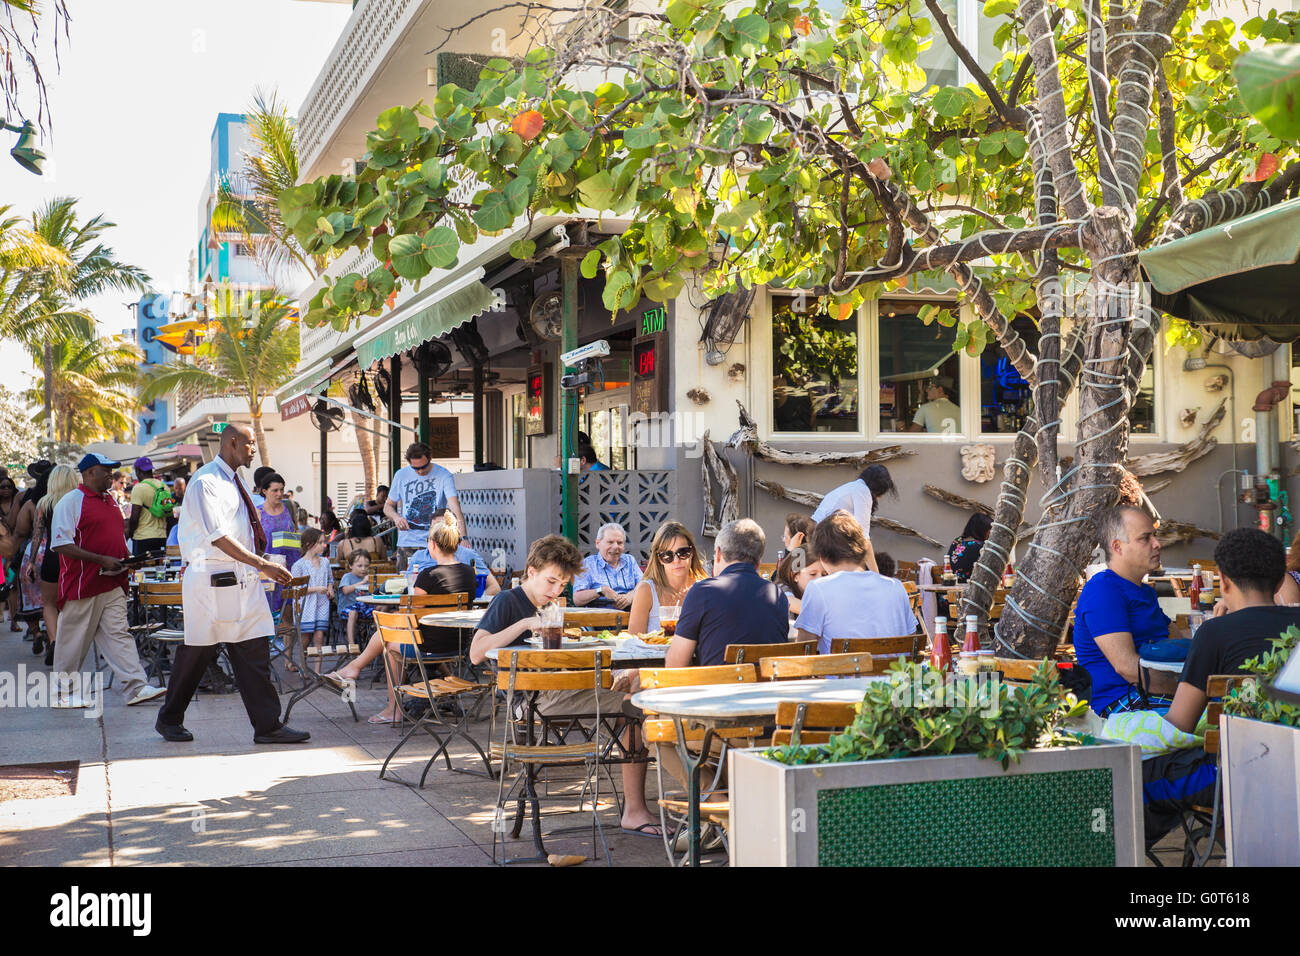 View of people dining outdoors along Ocean Drive in South Beach Miami Florida Stock Photo